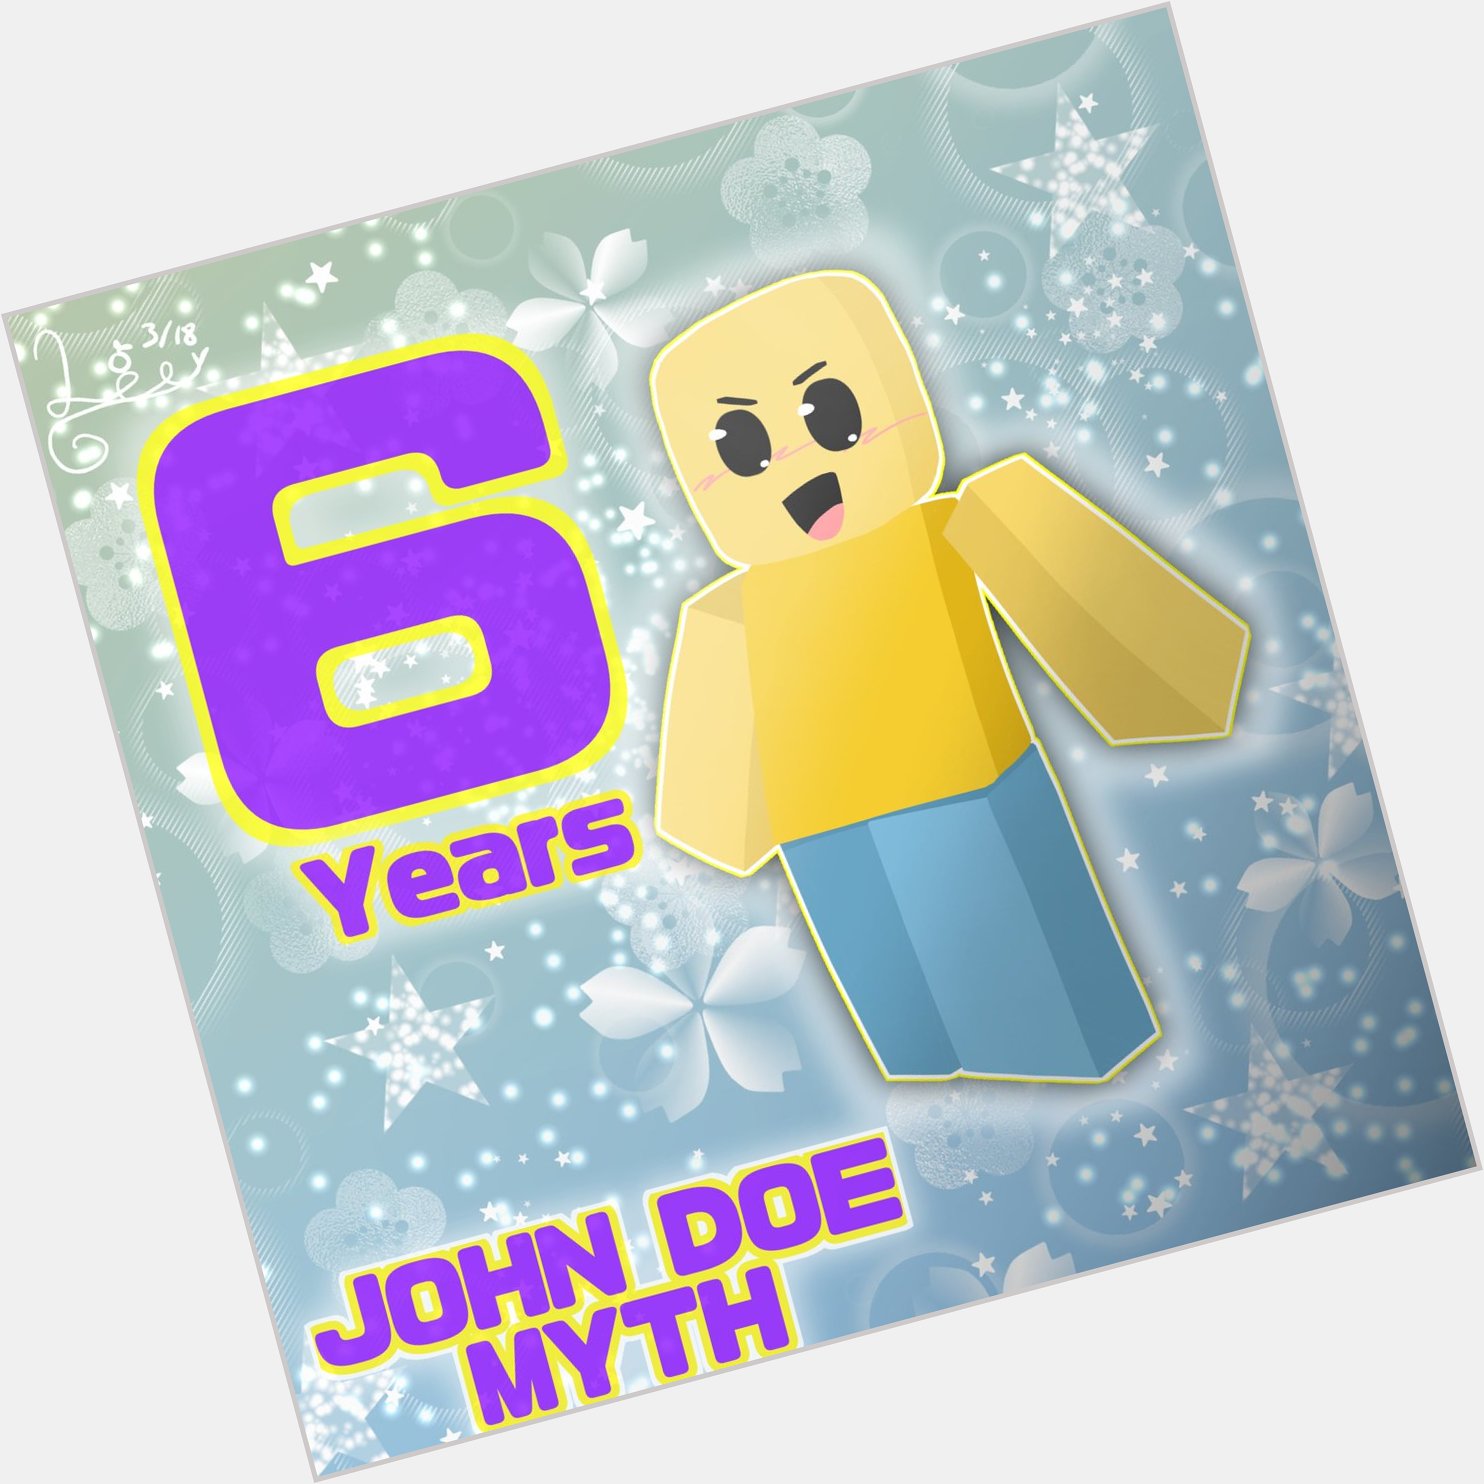 How do yall draw in this style im struggling.
ANYWAYS HAPPY 6TH BIRTHDAY TO THE JOHN DOE DAY LOL  